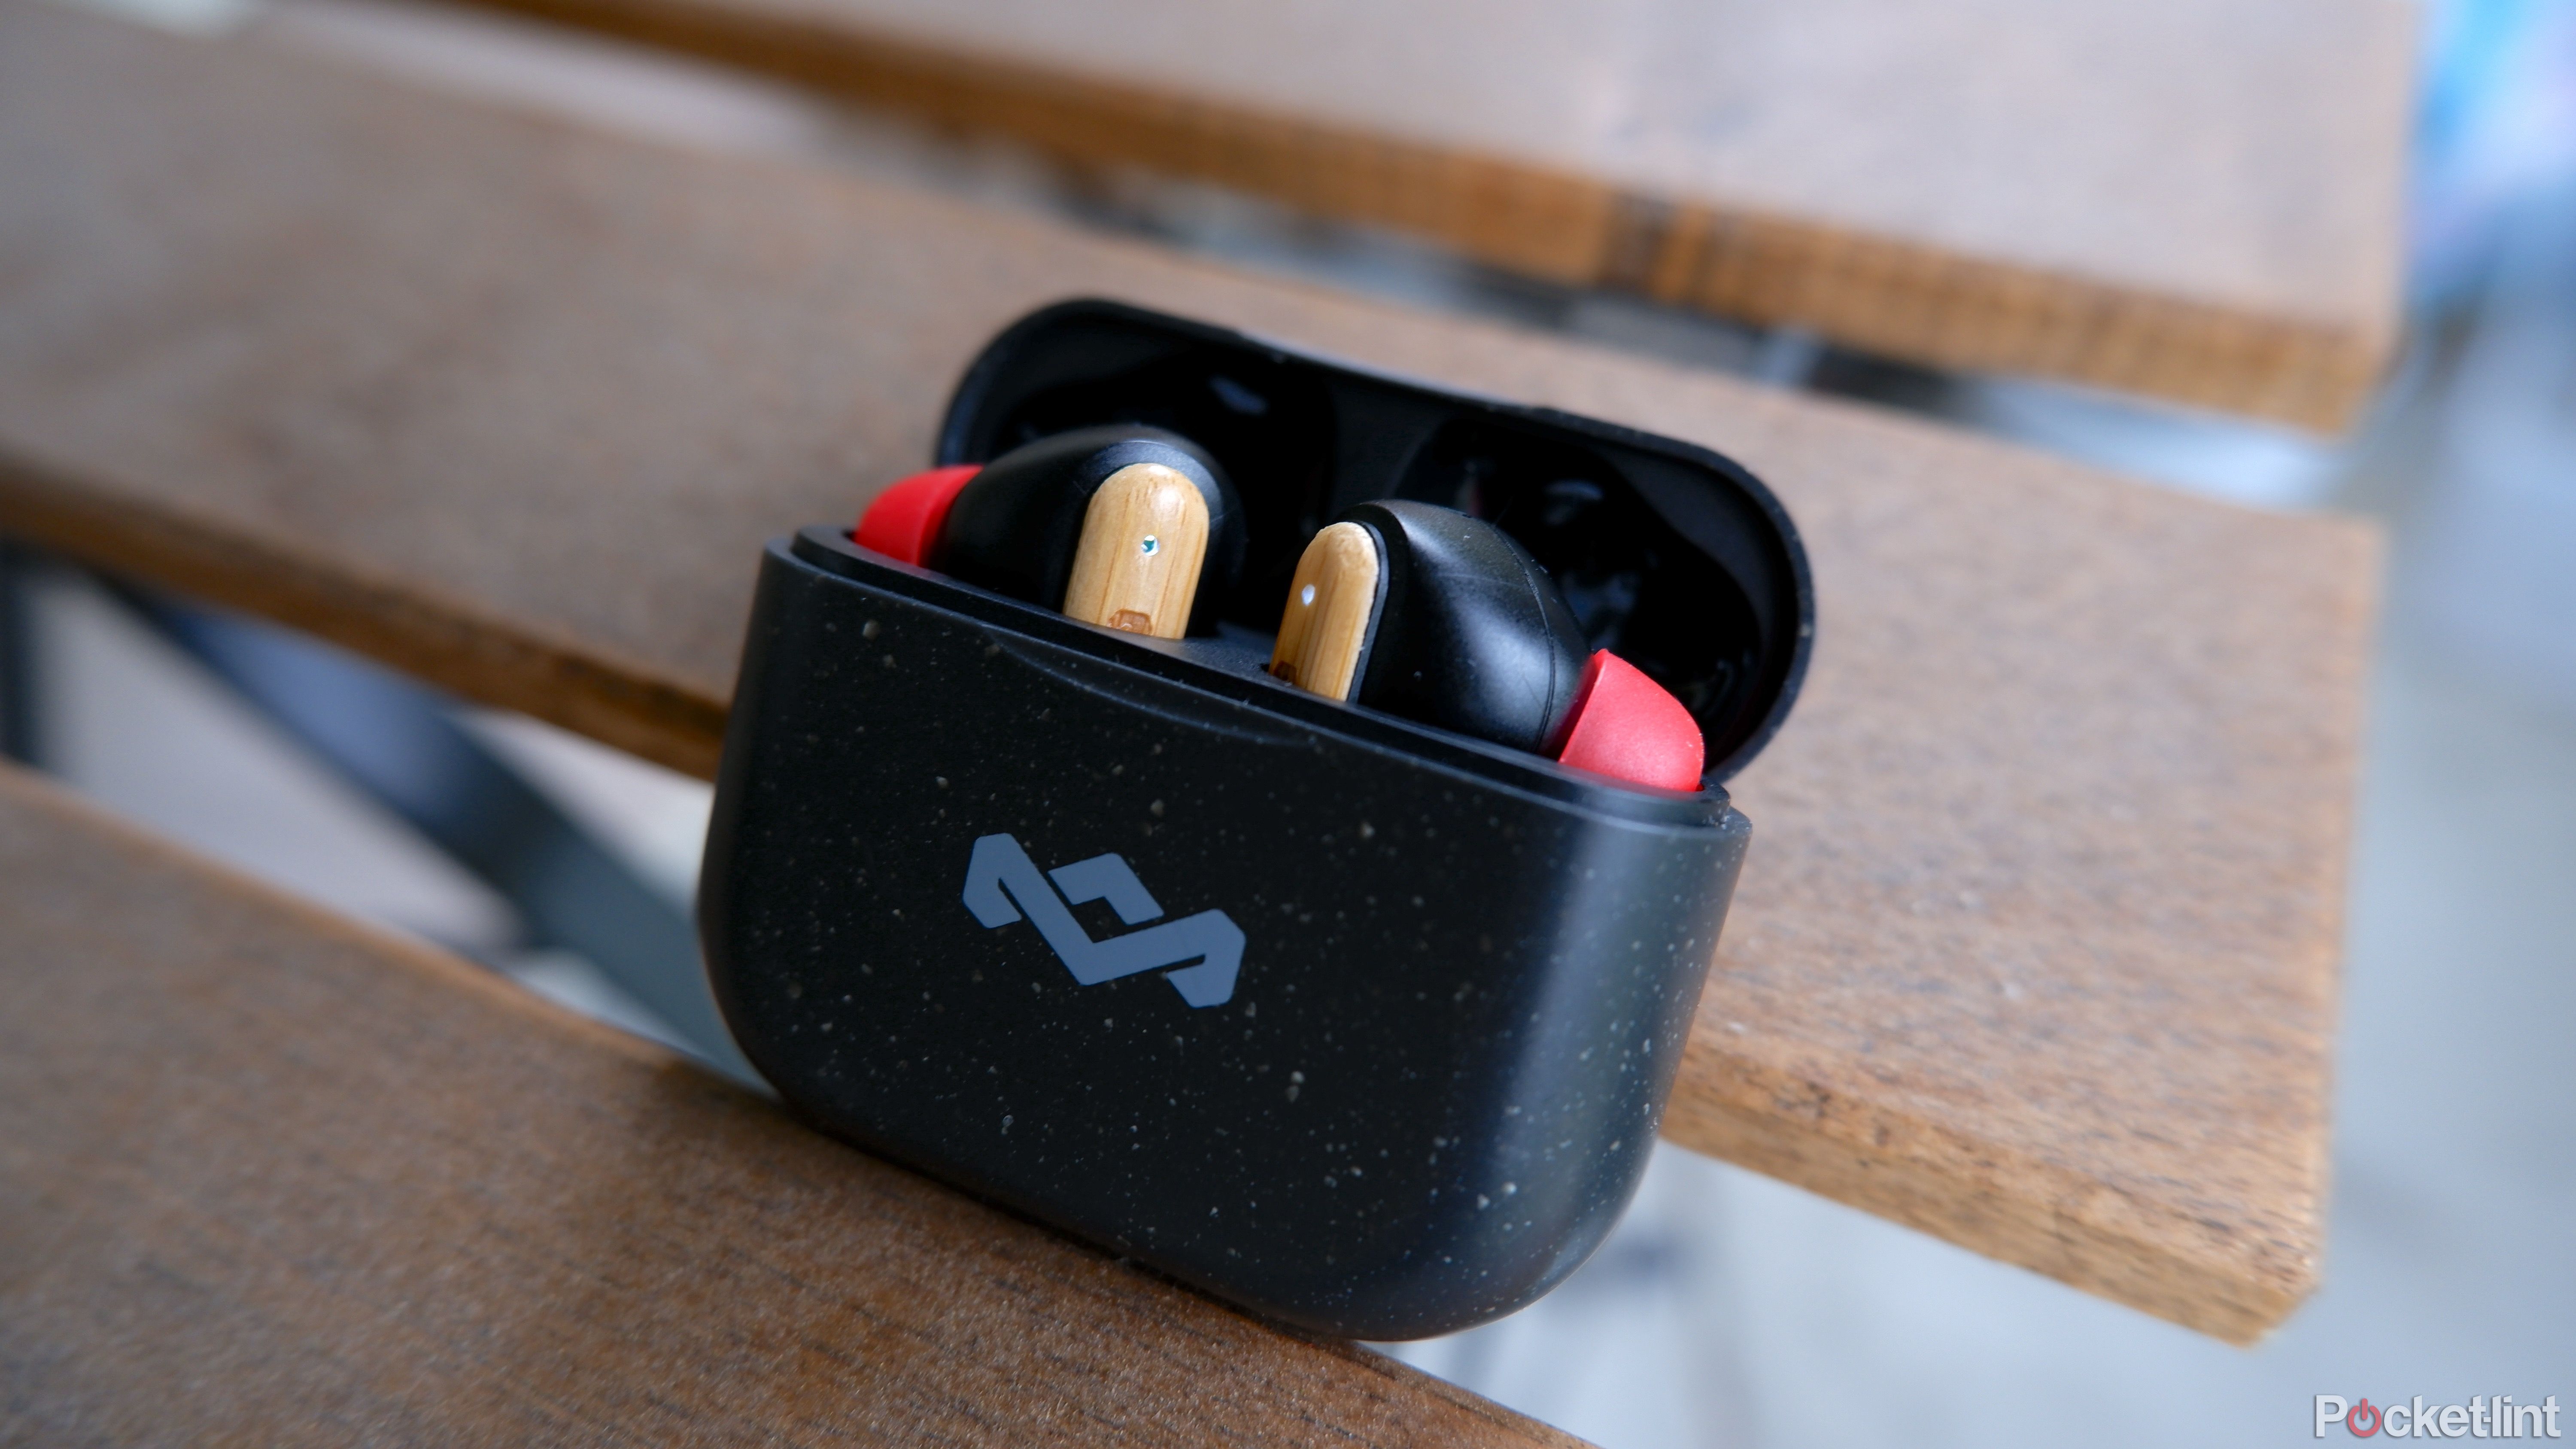 The House of Marley Little Bird earbuds inside their case resting on a patio table outdoors